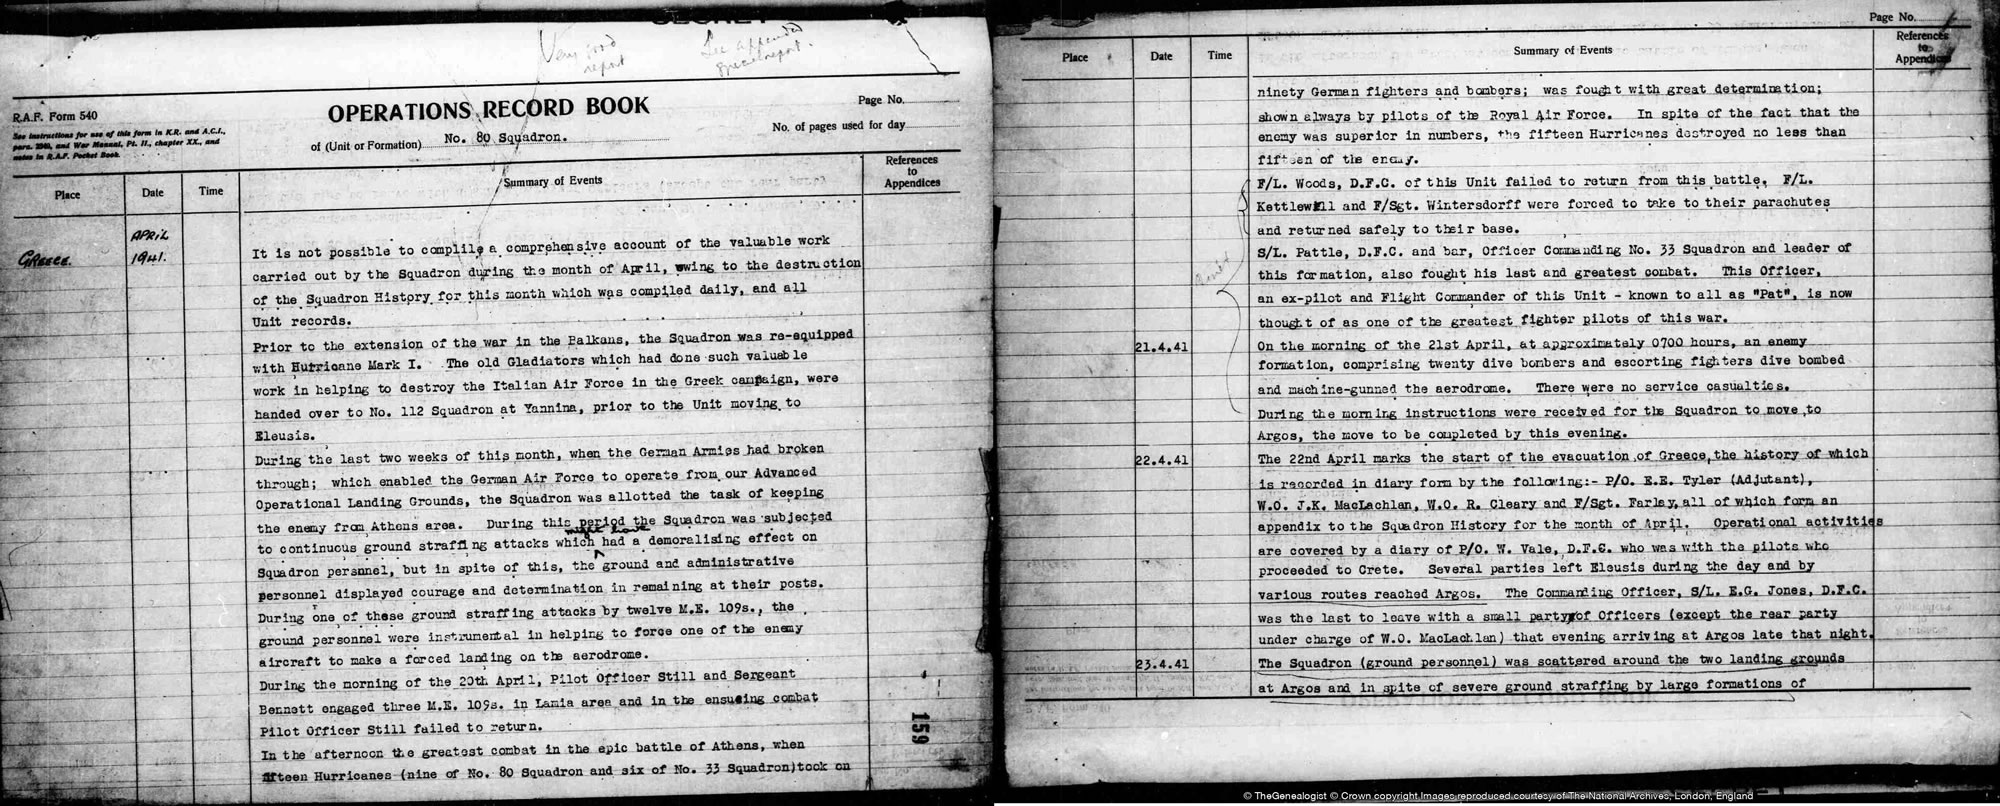 Pages from No 80 Squadron's Operations Record Book which mentions the dog-fight over Athens